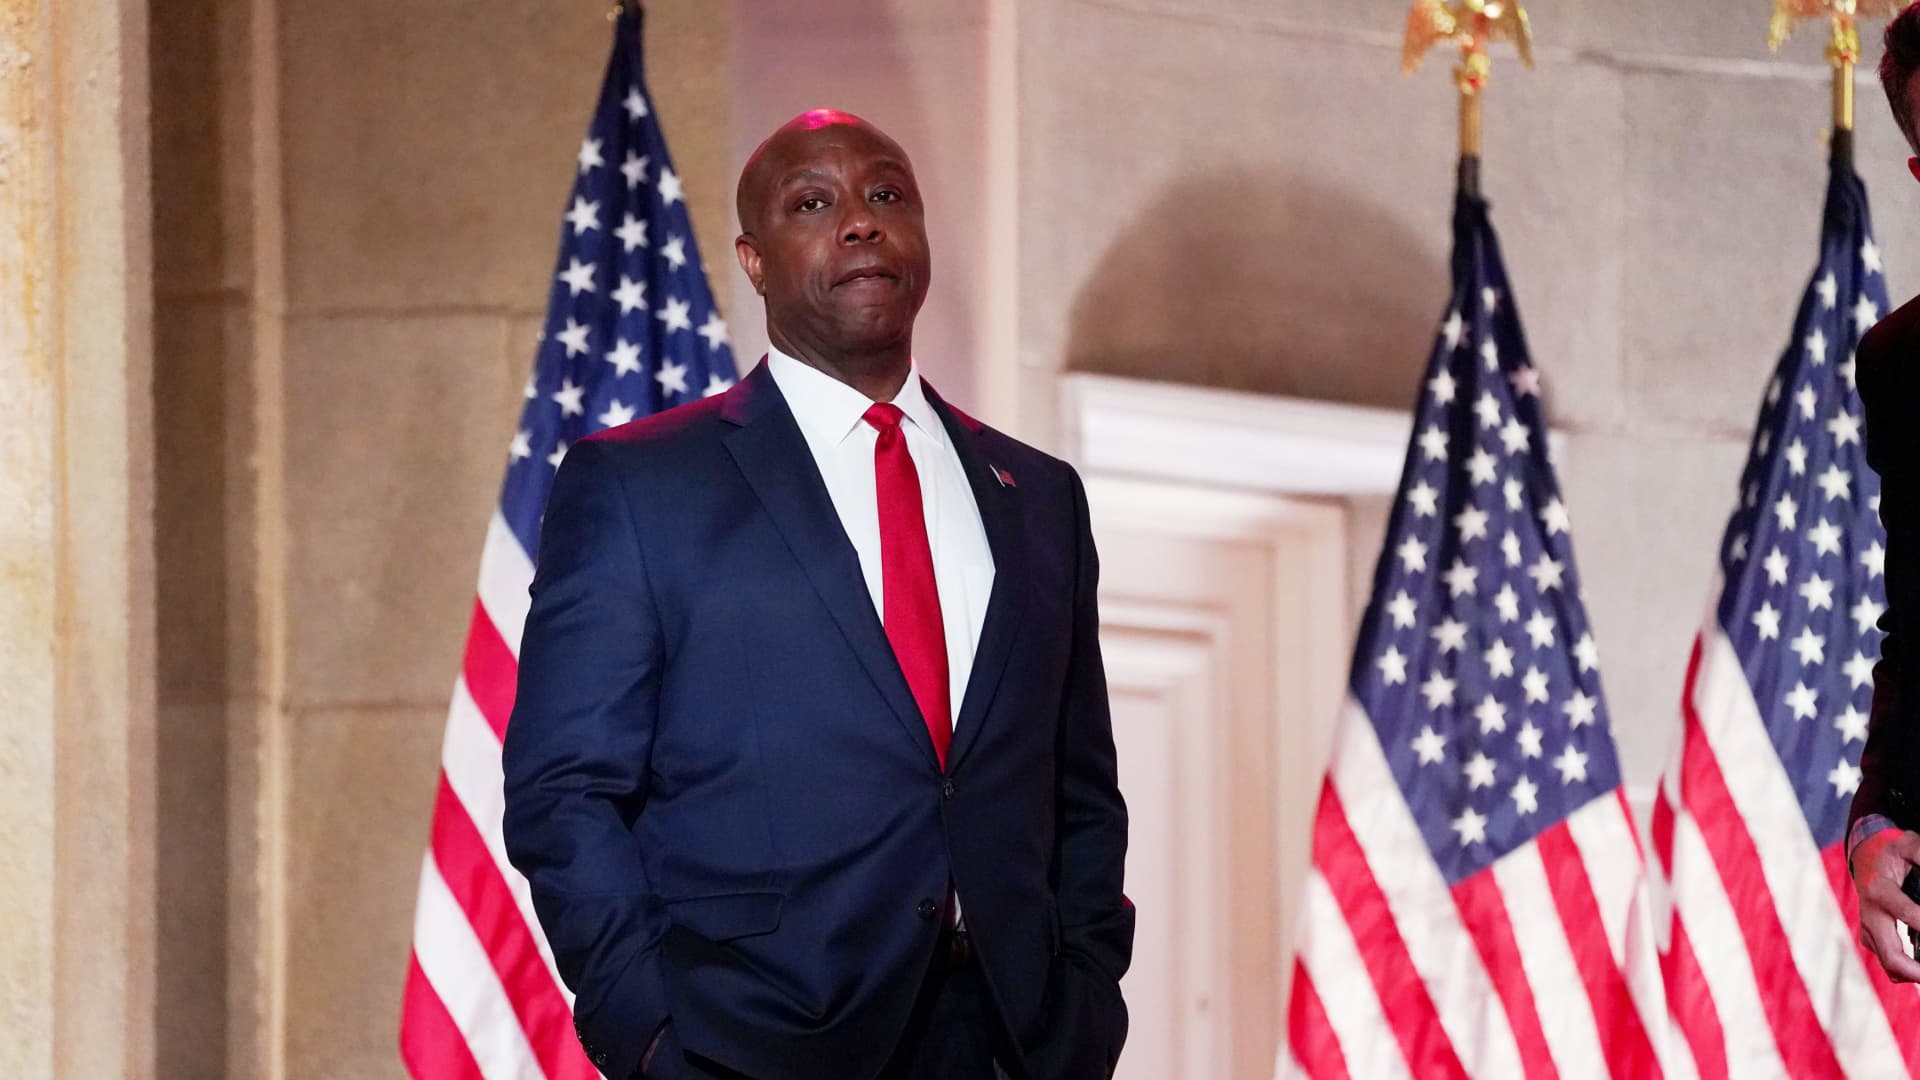 U.S. Senator Tim Scott (R-SC) waits to speak to the largely virtual 2020 Republican National Convention in a live address from the Mellon Auditorium in Washington, U.S., August 24, 2020.